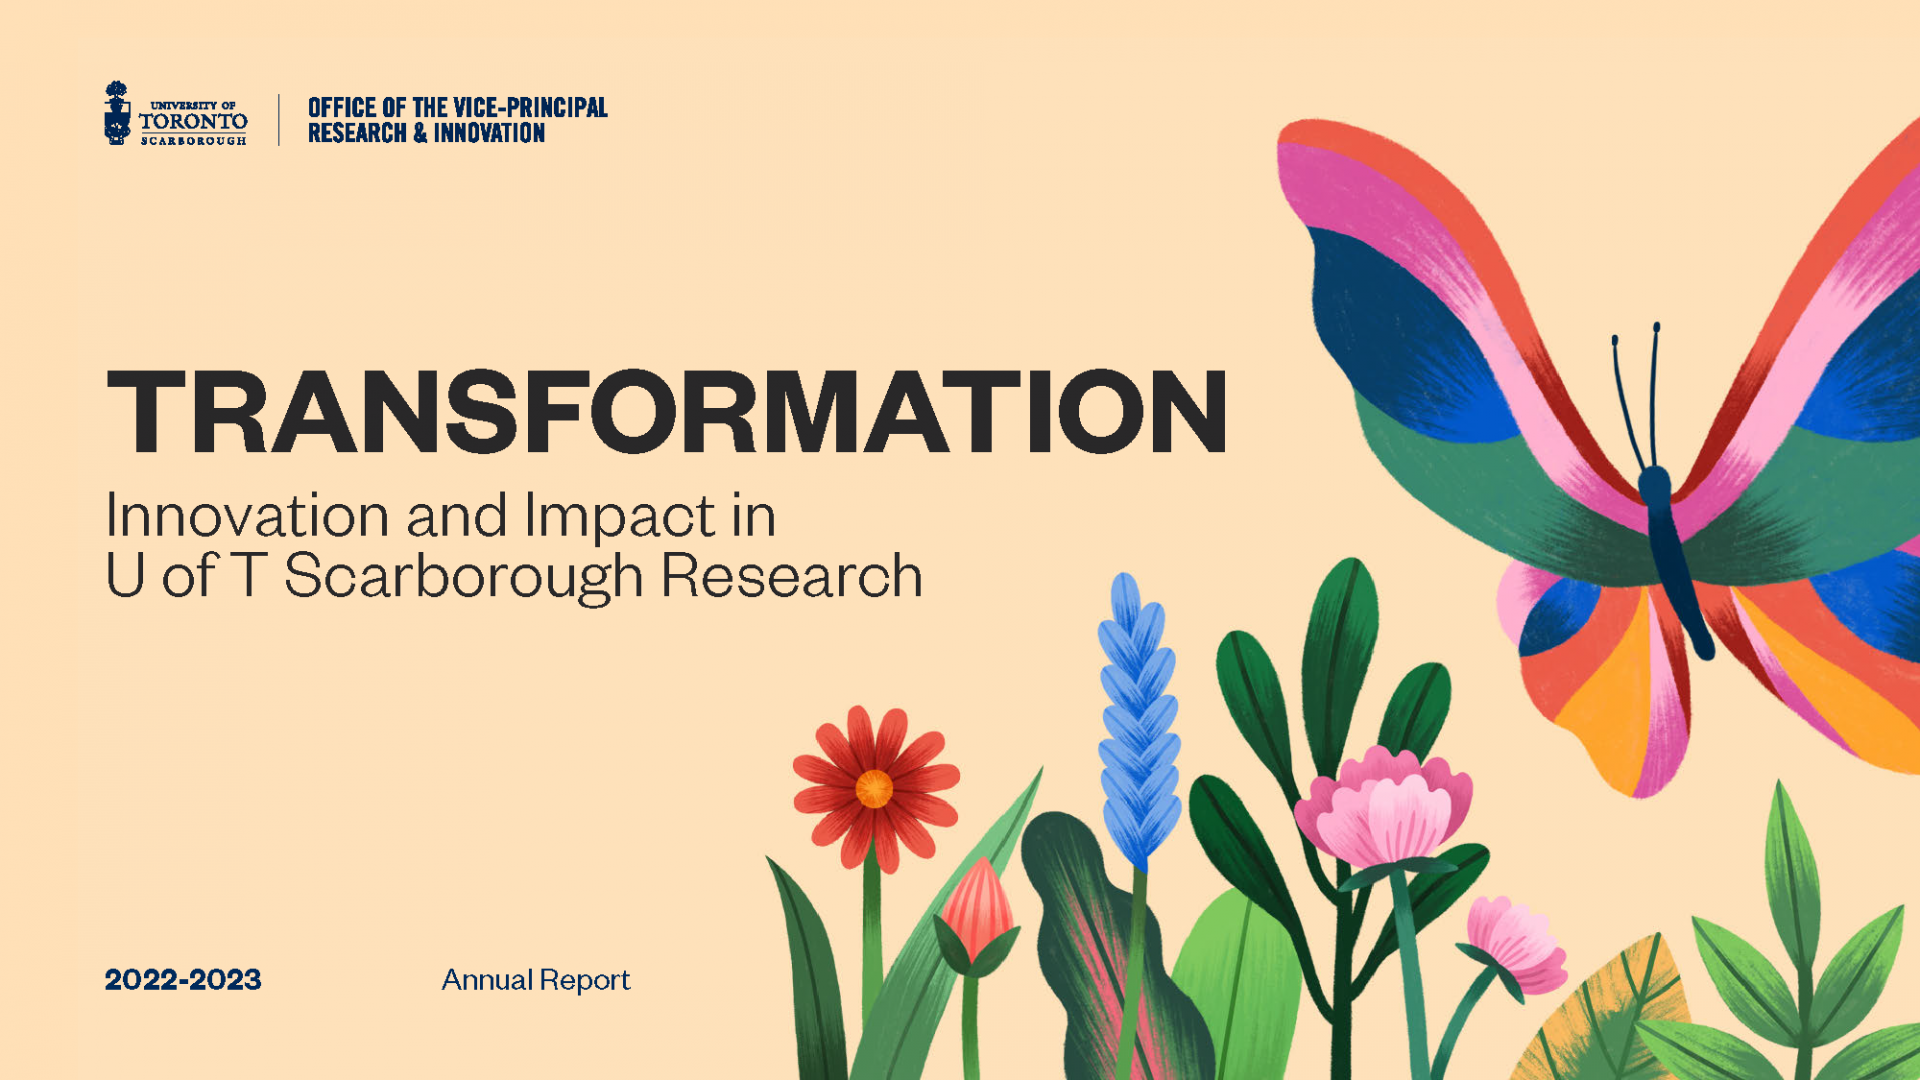 Cover of the 2022-2023 OVPRI Annual Report includes illustrations of flowers and a butterfly.